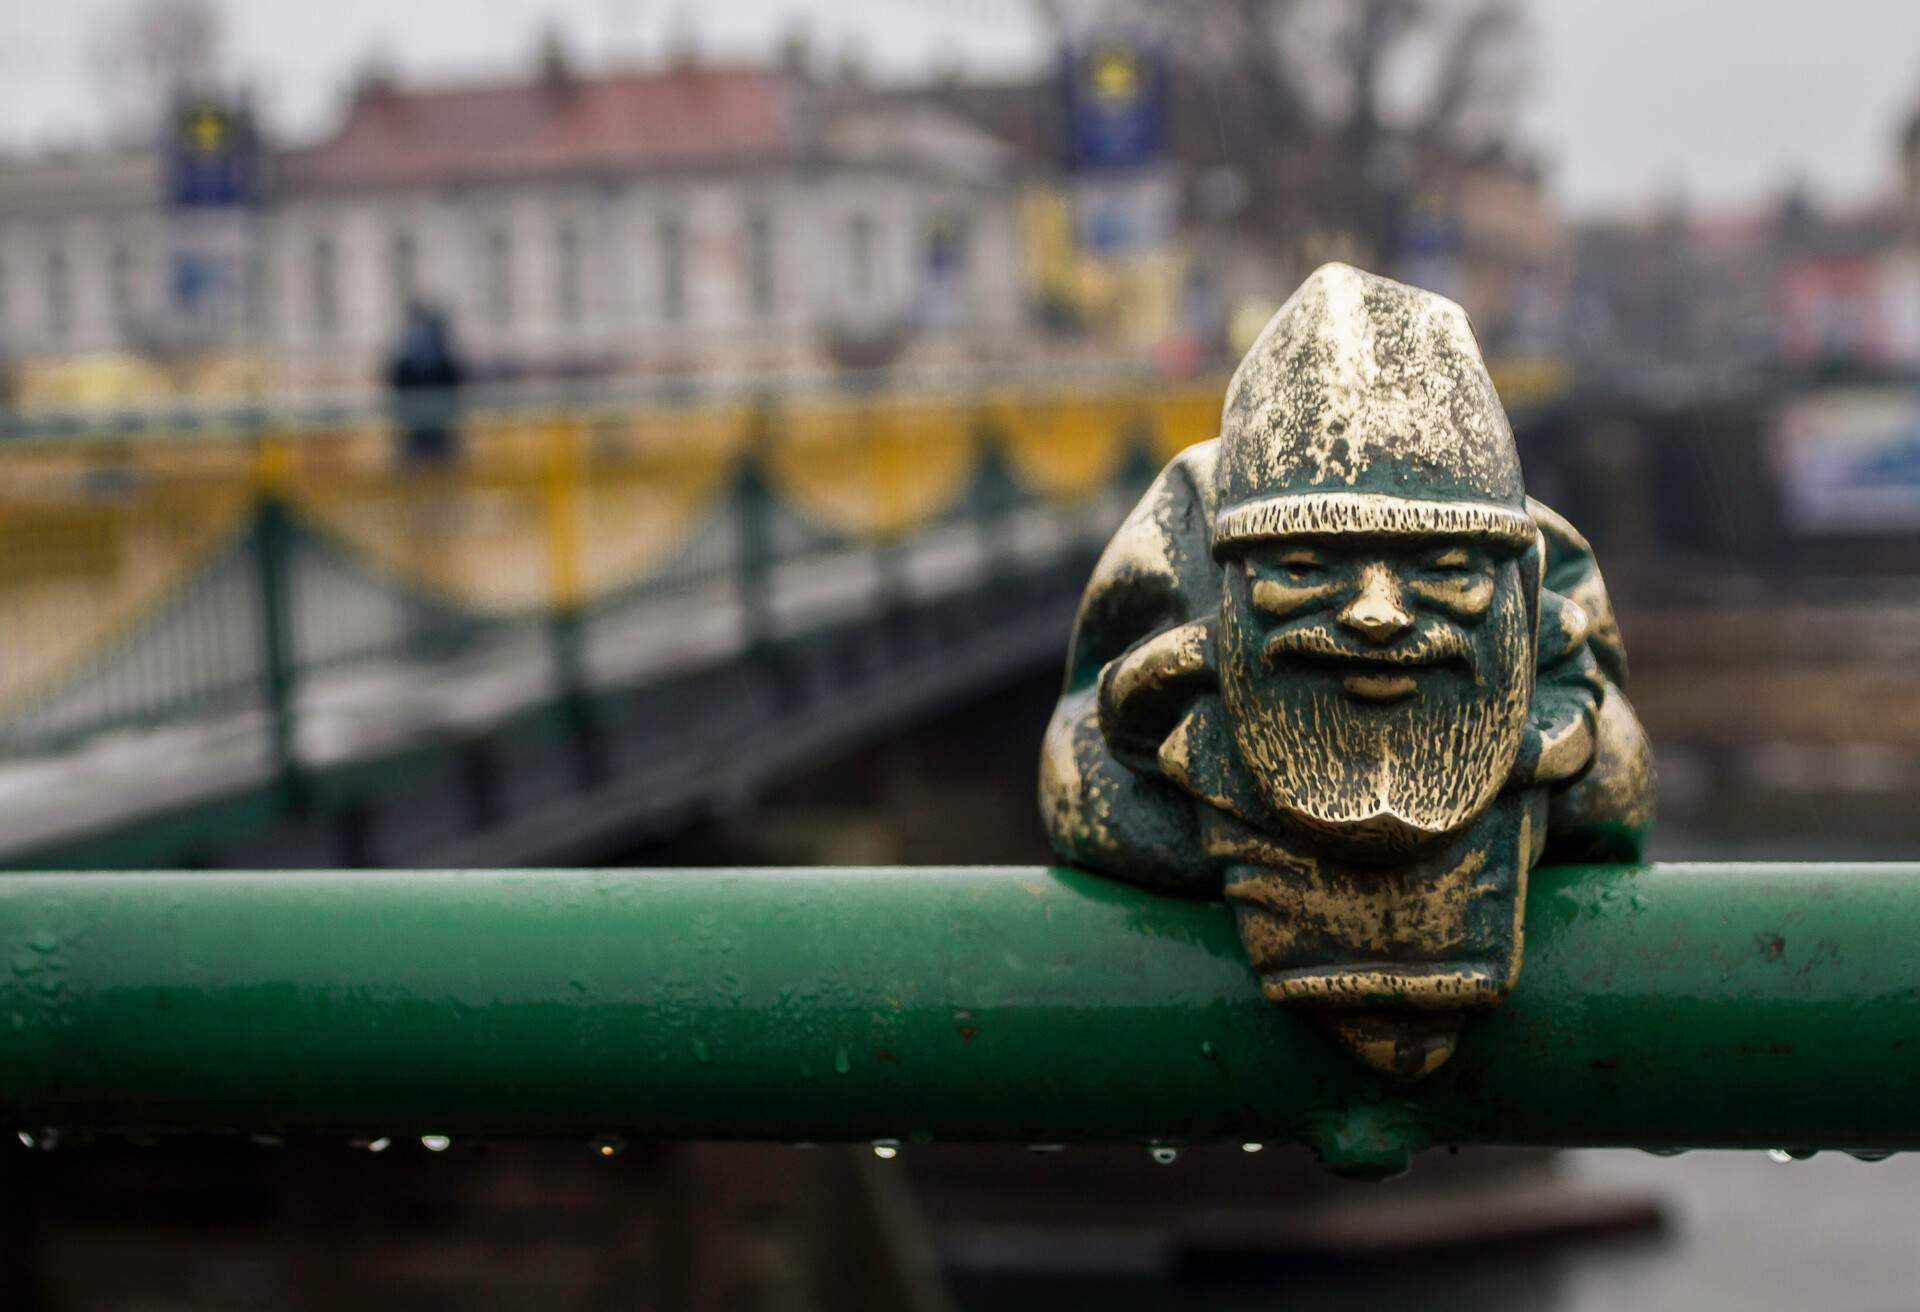 DEST_POLAND_WROCLAW_GNOME_STATUE_GettyImages-467392190